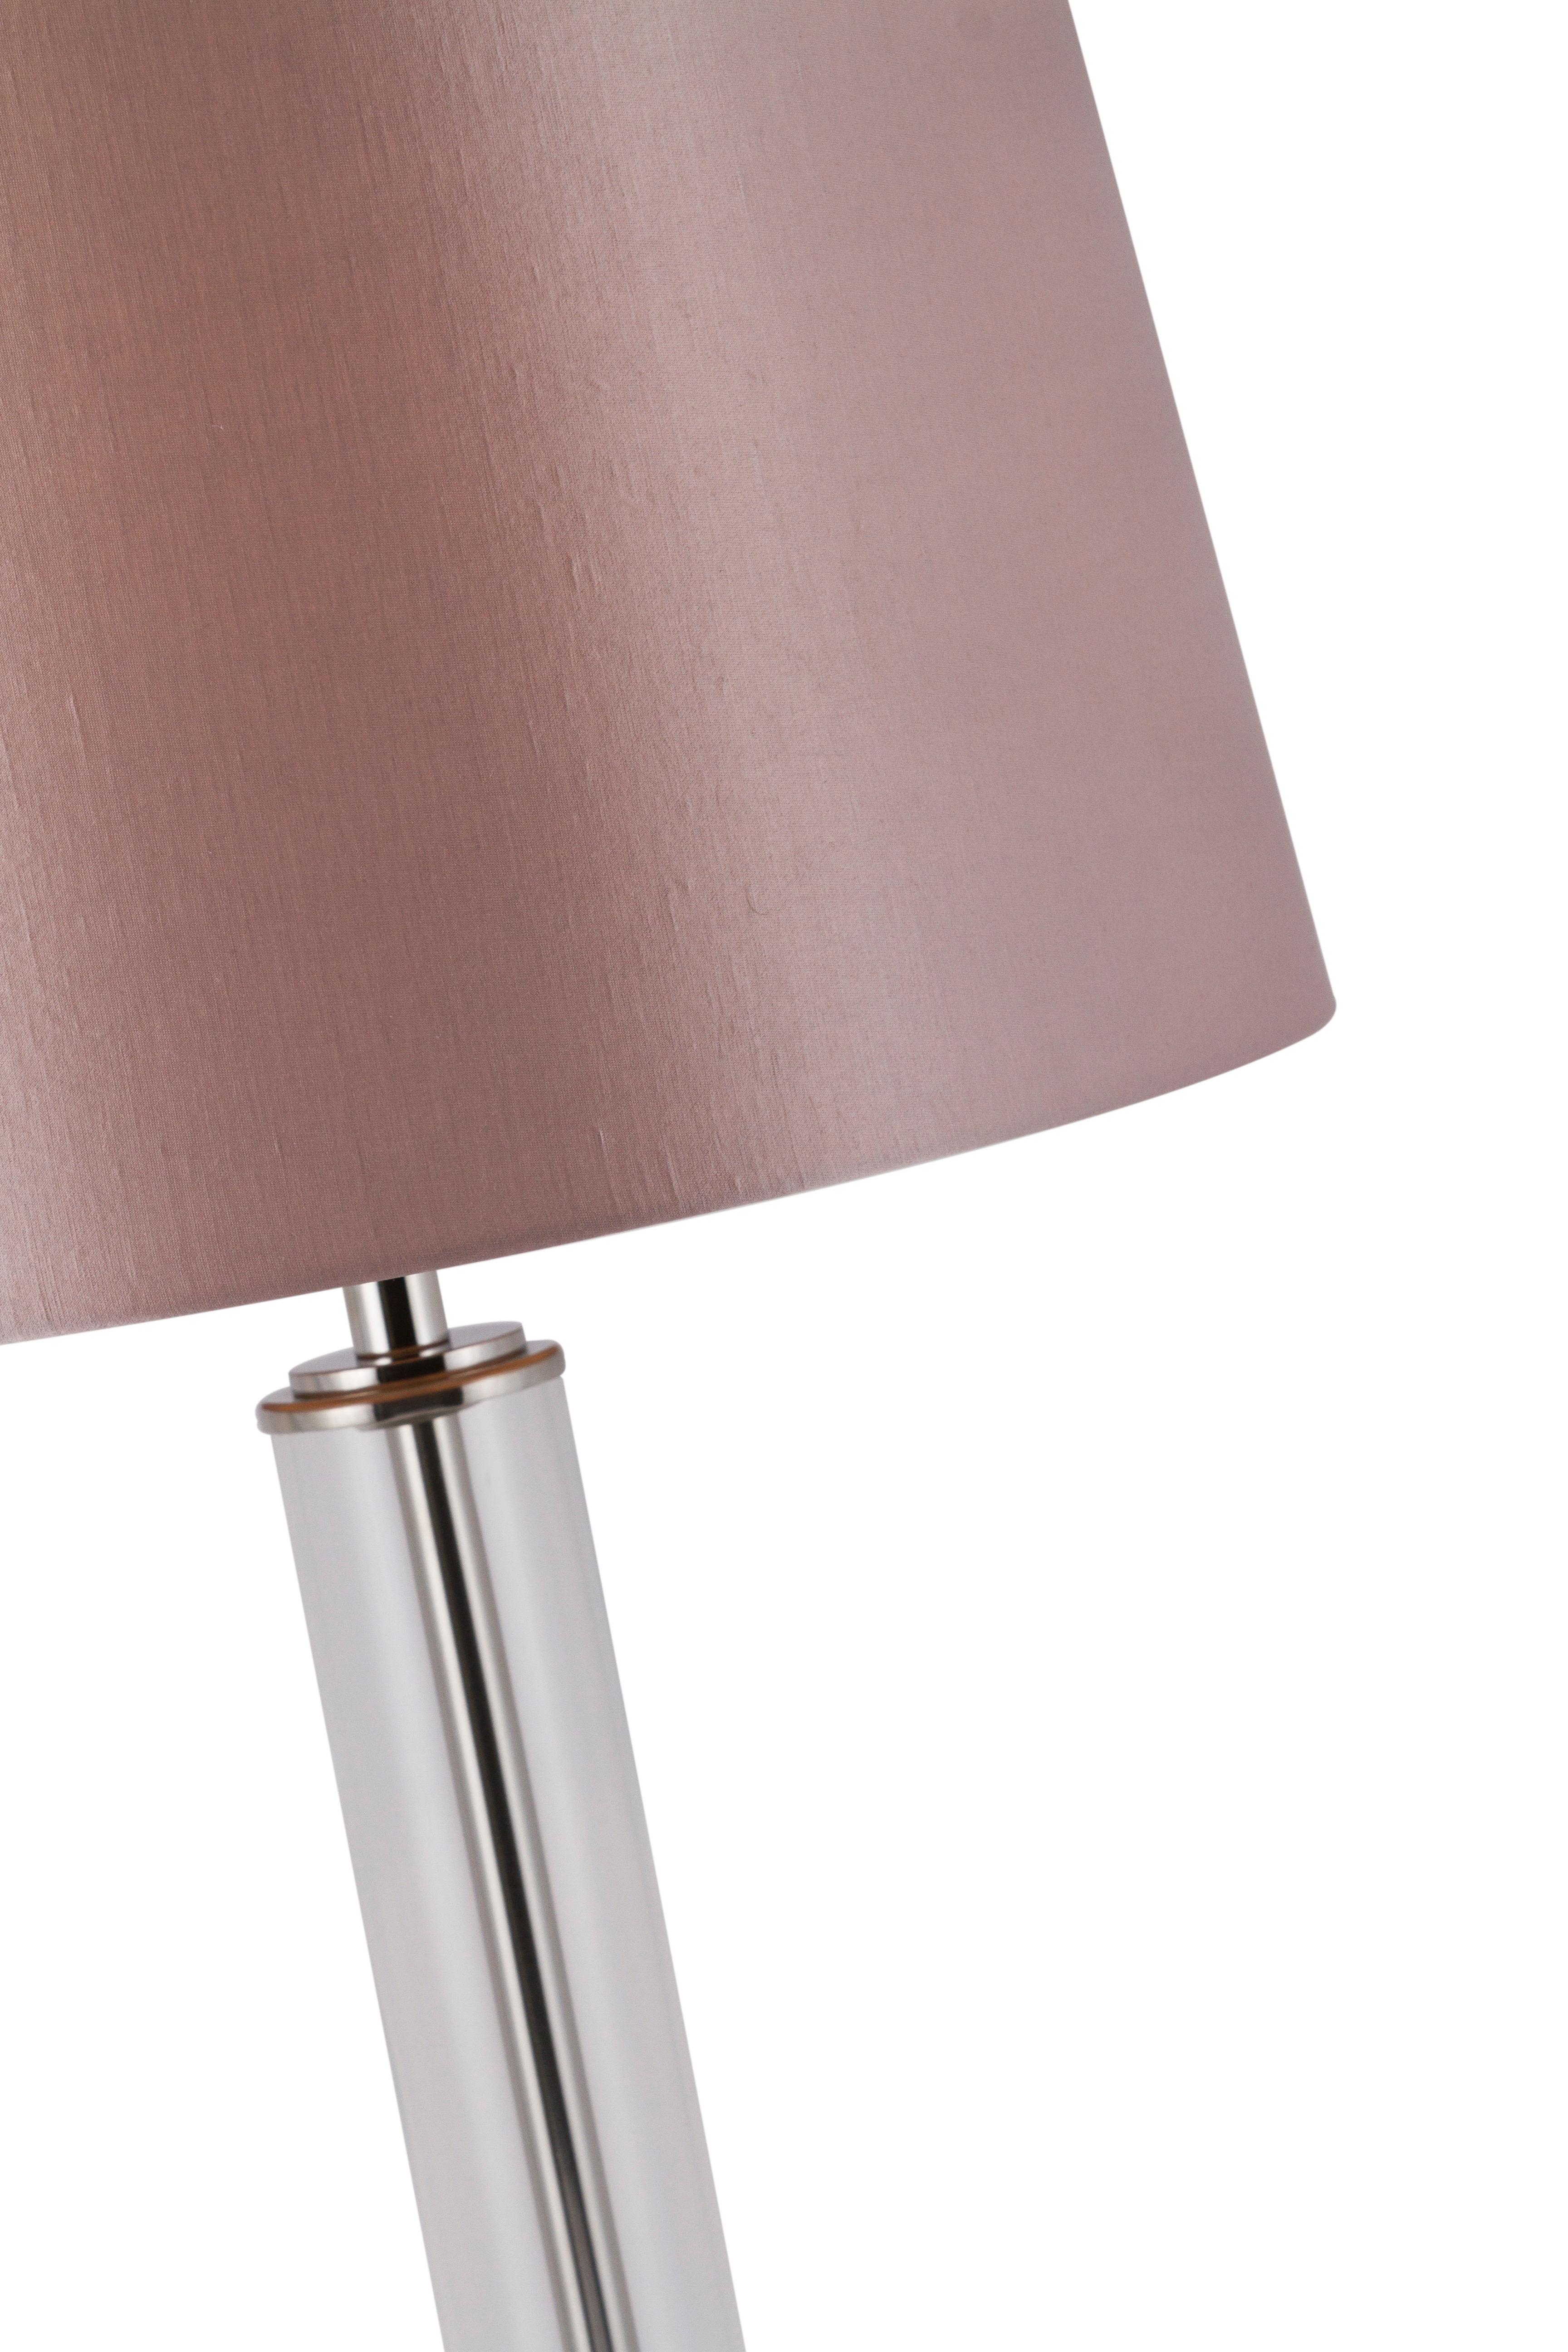 Hand-Crafted Set of 2 Modern Dumont Table Lamps, Pink Lampshade, Handmade in Portugal For Sale